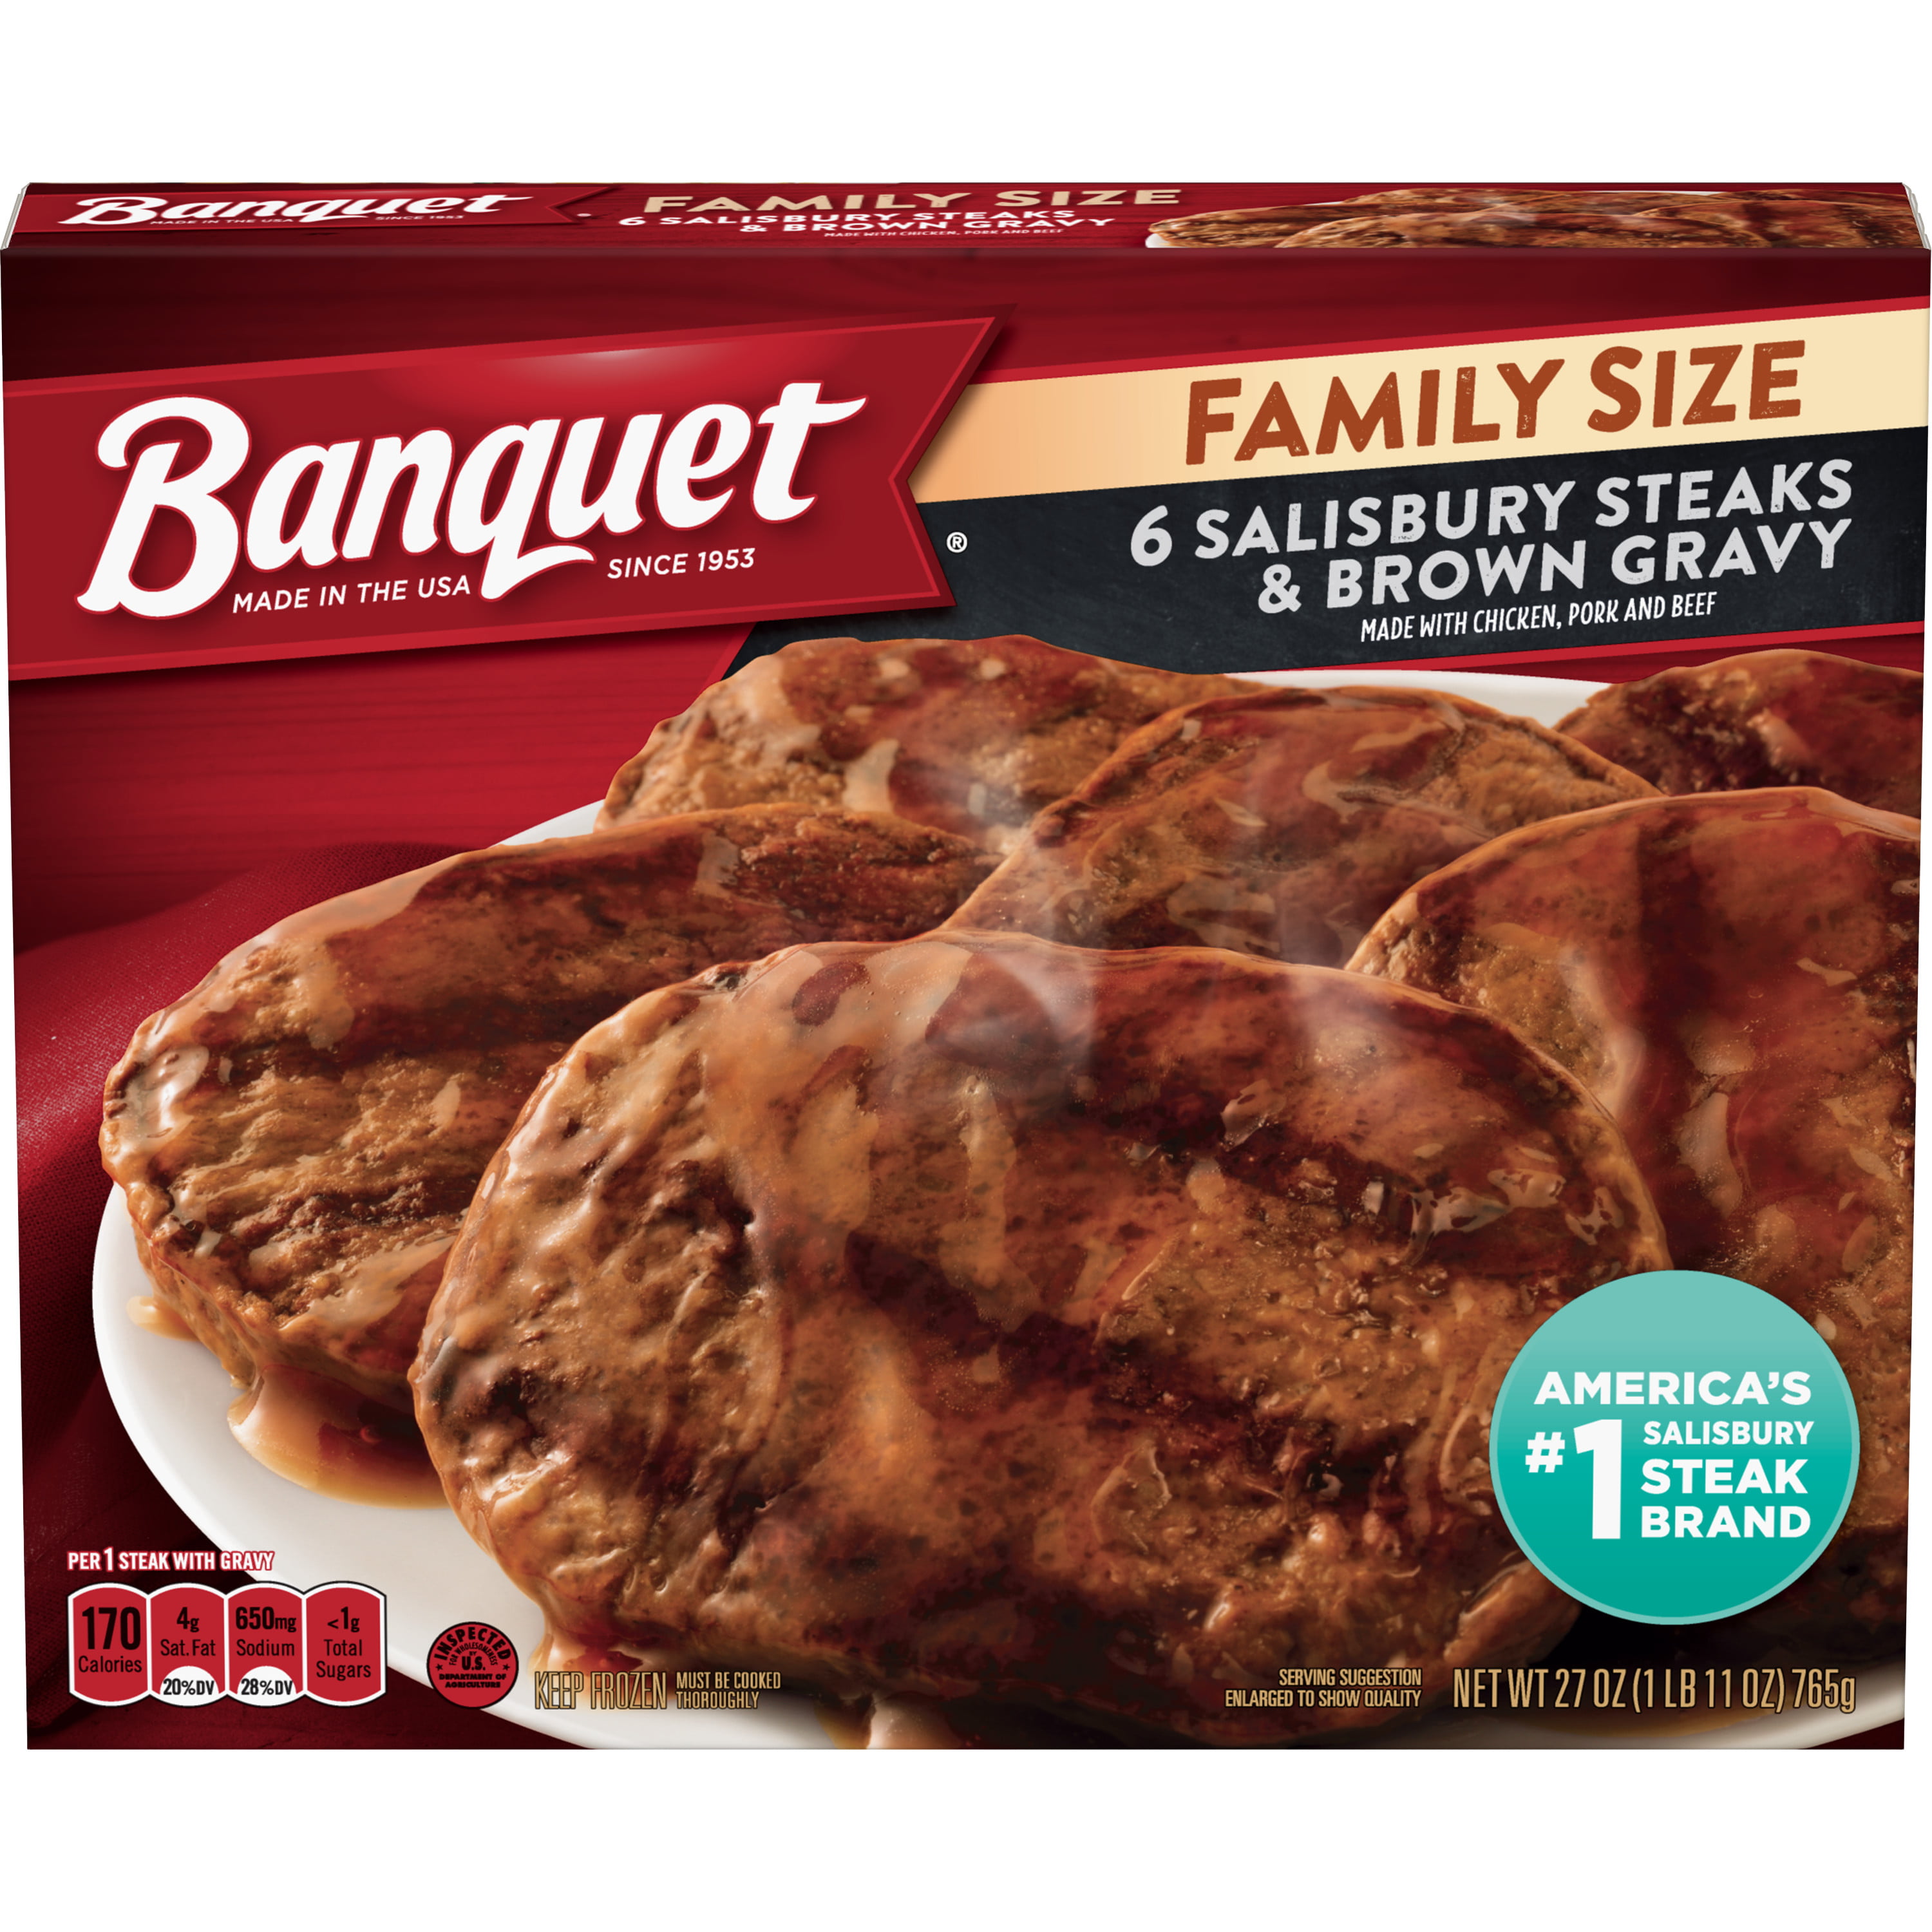 Banquet Family Size Salisbury Steaks and Brown Gravy, Frozen Meal, 27